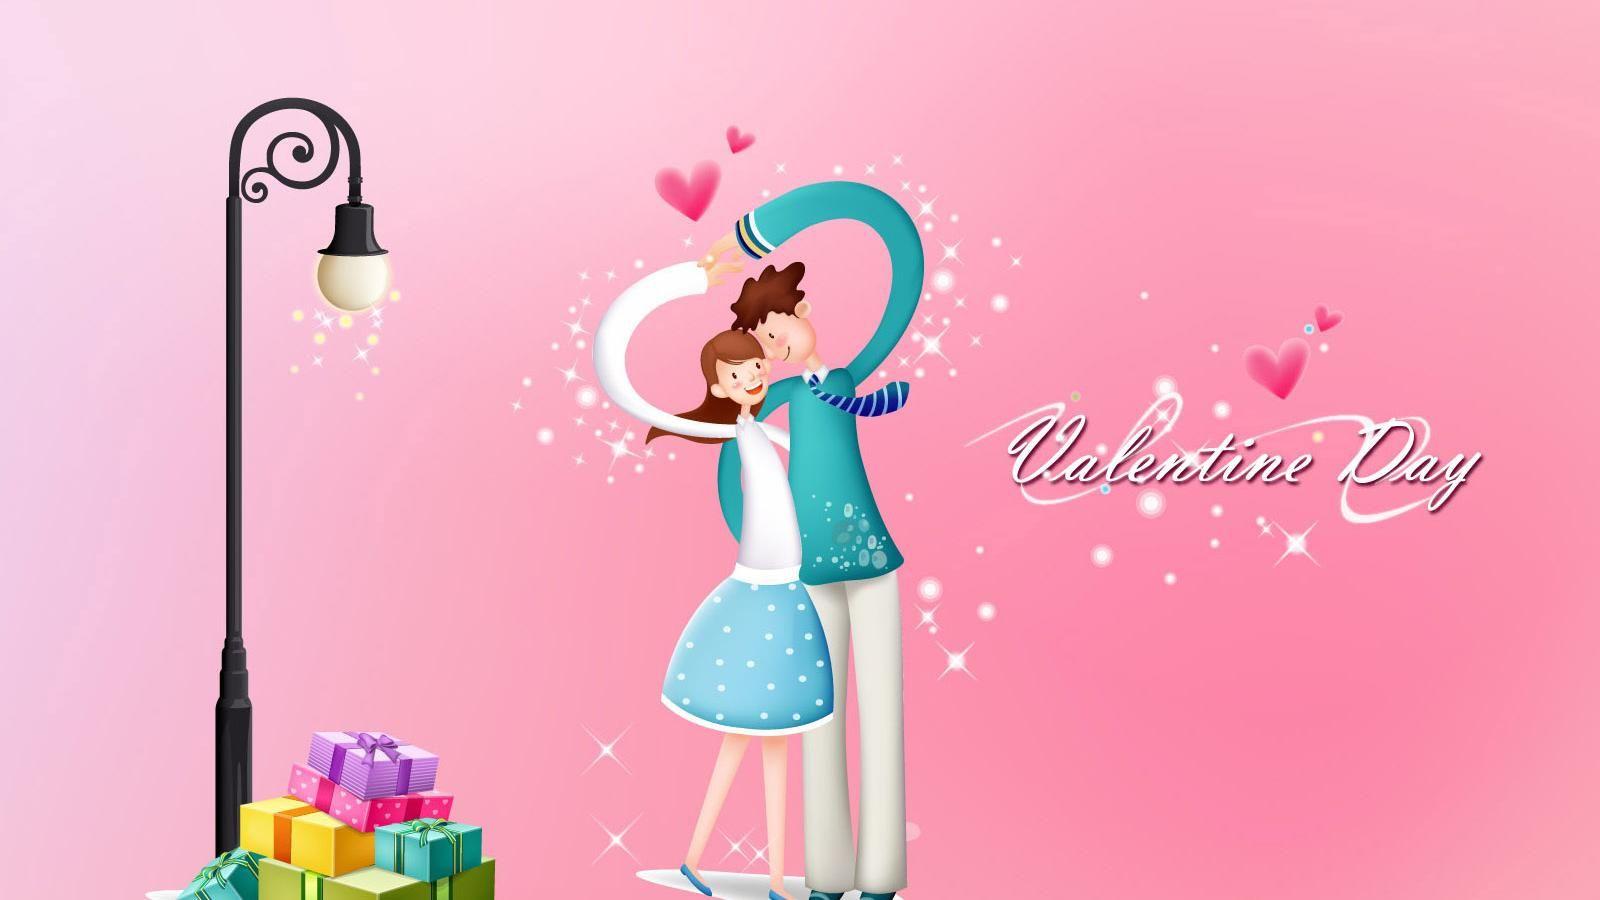 Valentines Day Wallpaper HD & 14th FEB image 2019 for lovers